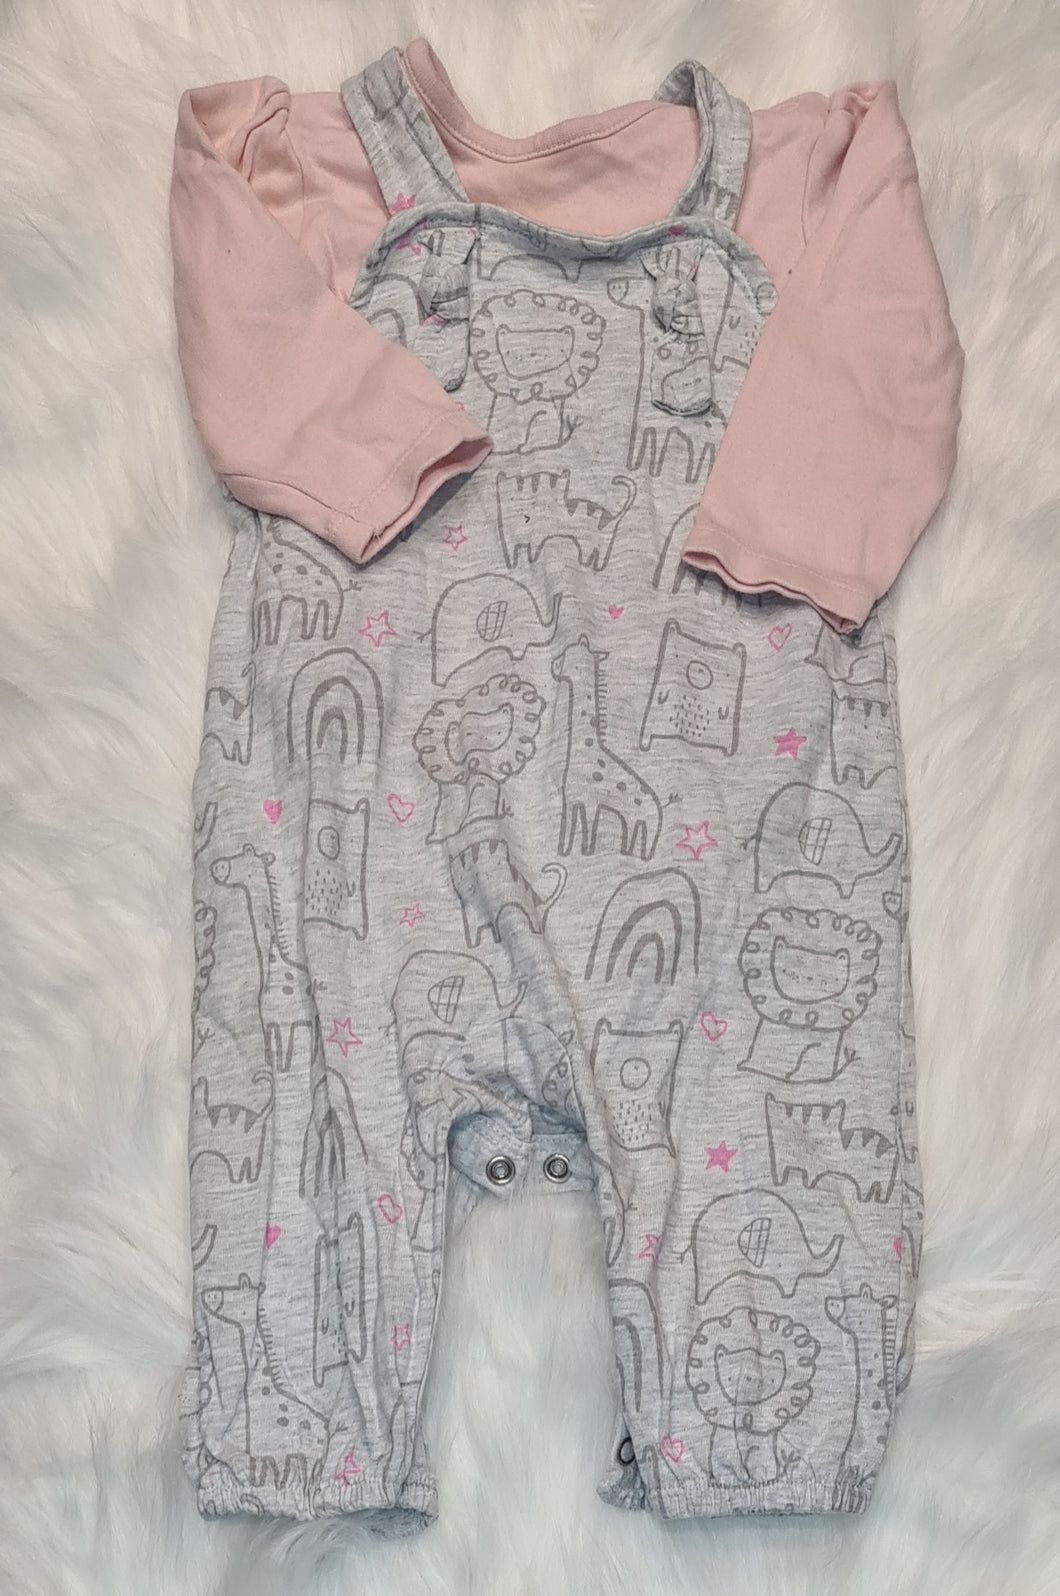 Girls 3-6 Months - Pink and Grey - Lion Romper